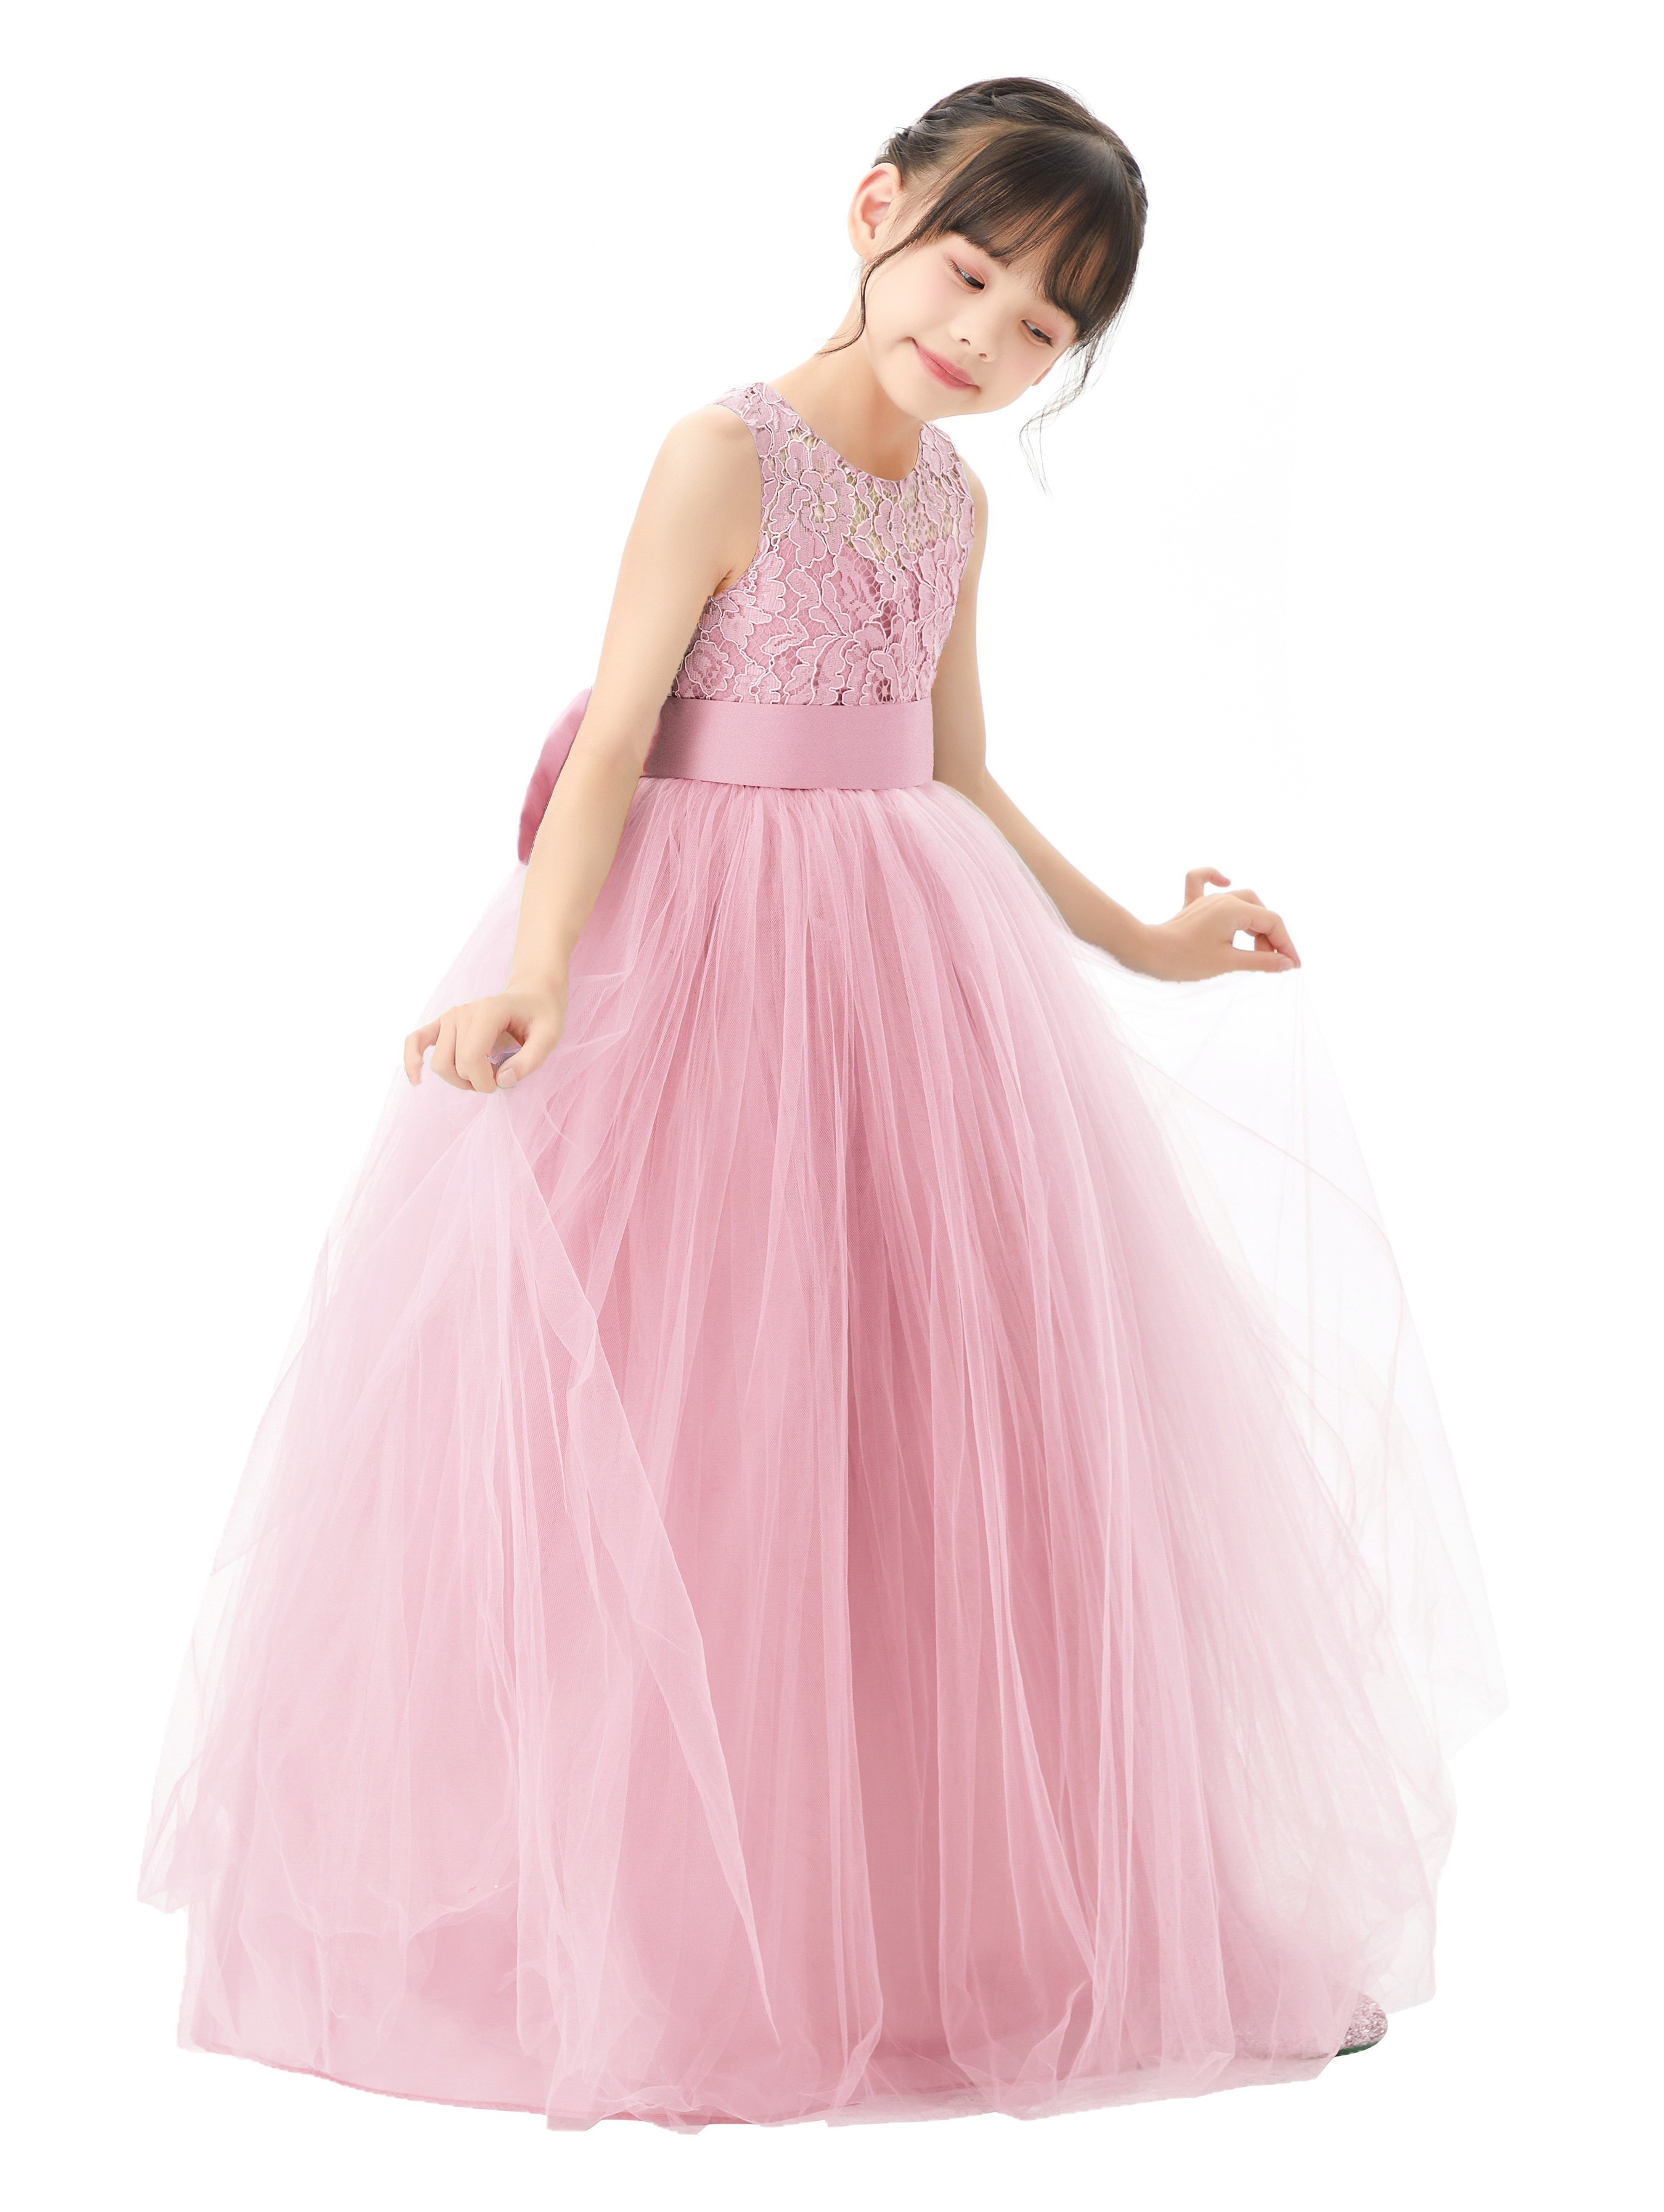 Dusty Rose Illusion Lace Flower Girl Dress 331